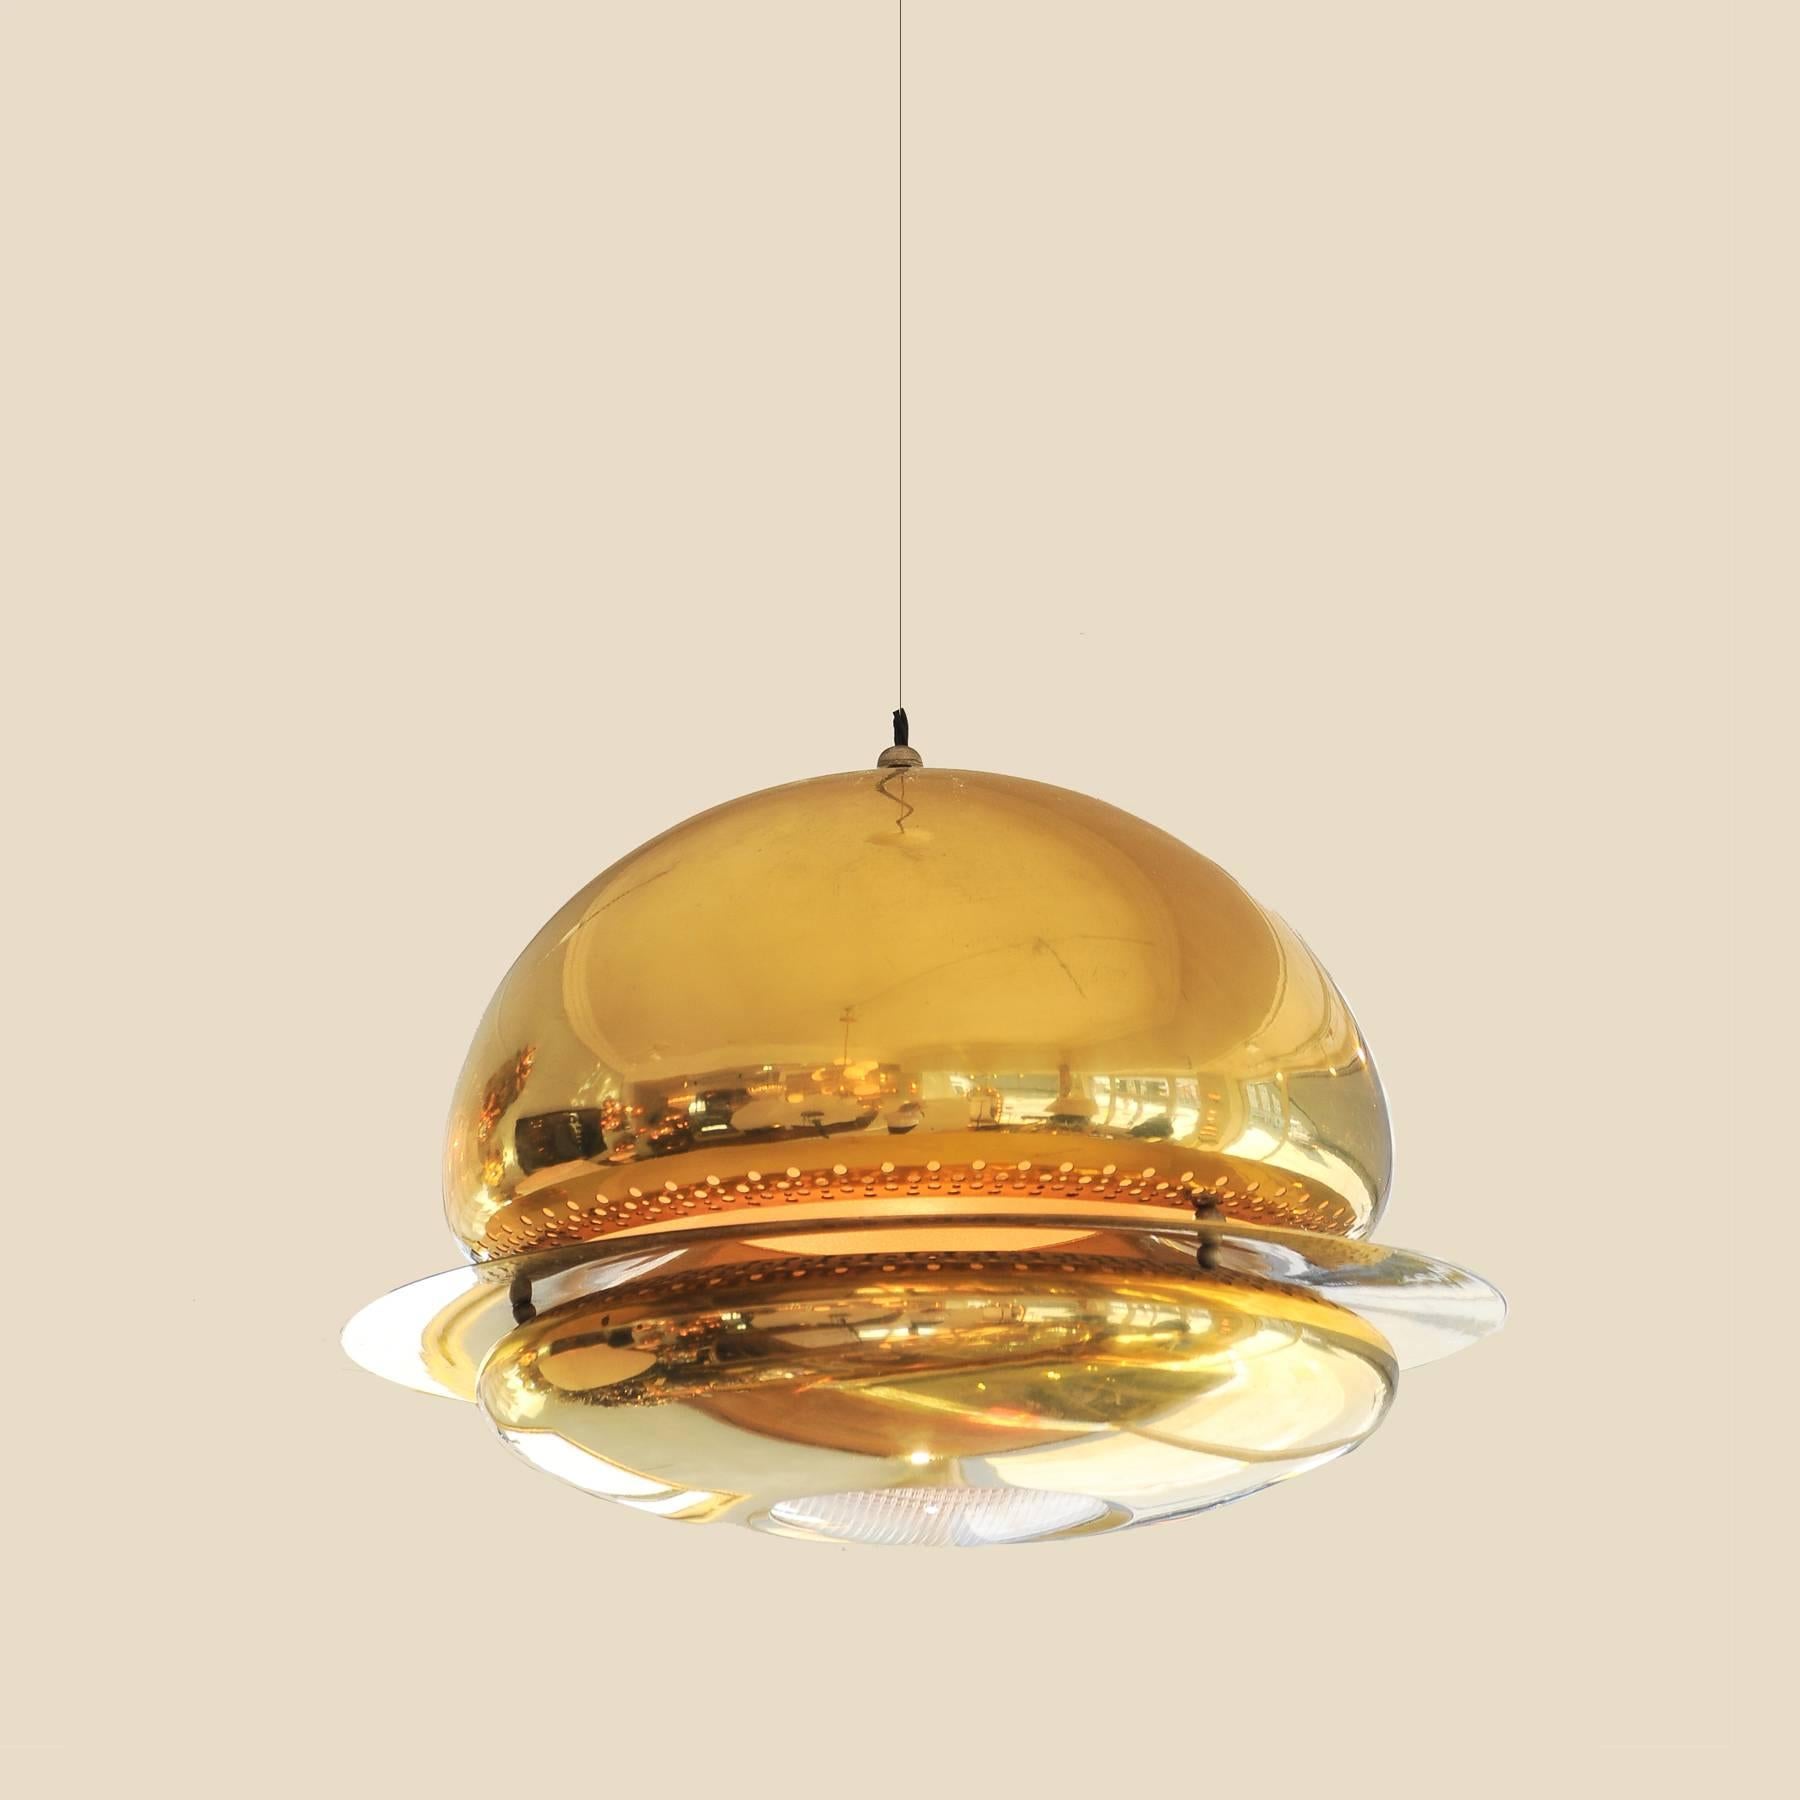 Impressive brass 'cosmic' chandelier comprising upper dome with floating decorative brass ring that allows for a band of light and interesting reflection. Brass base with textured glass section also exudes subtle mood light.